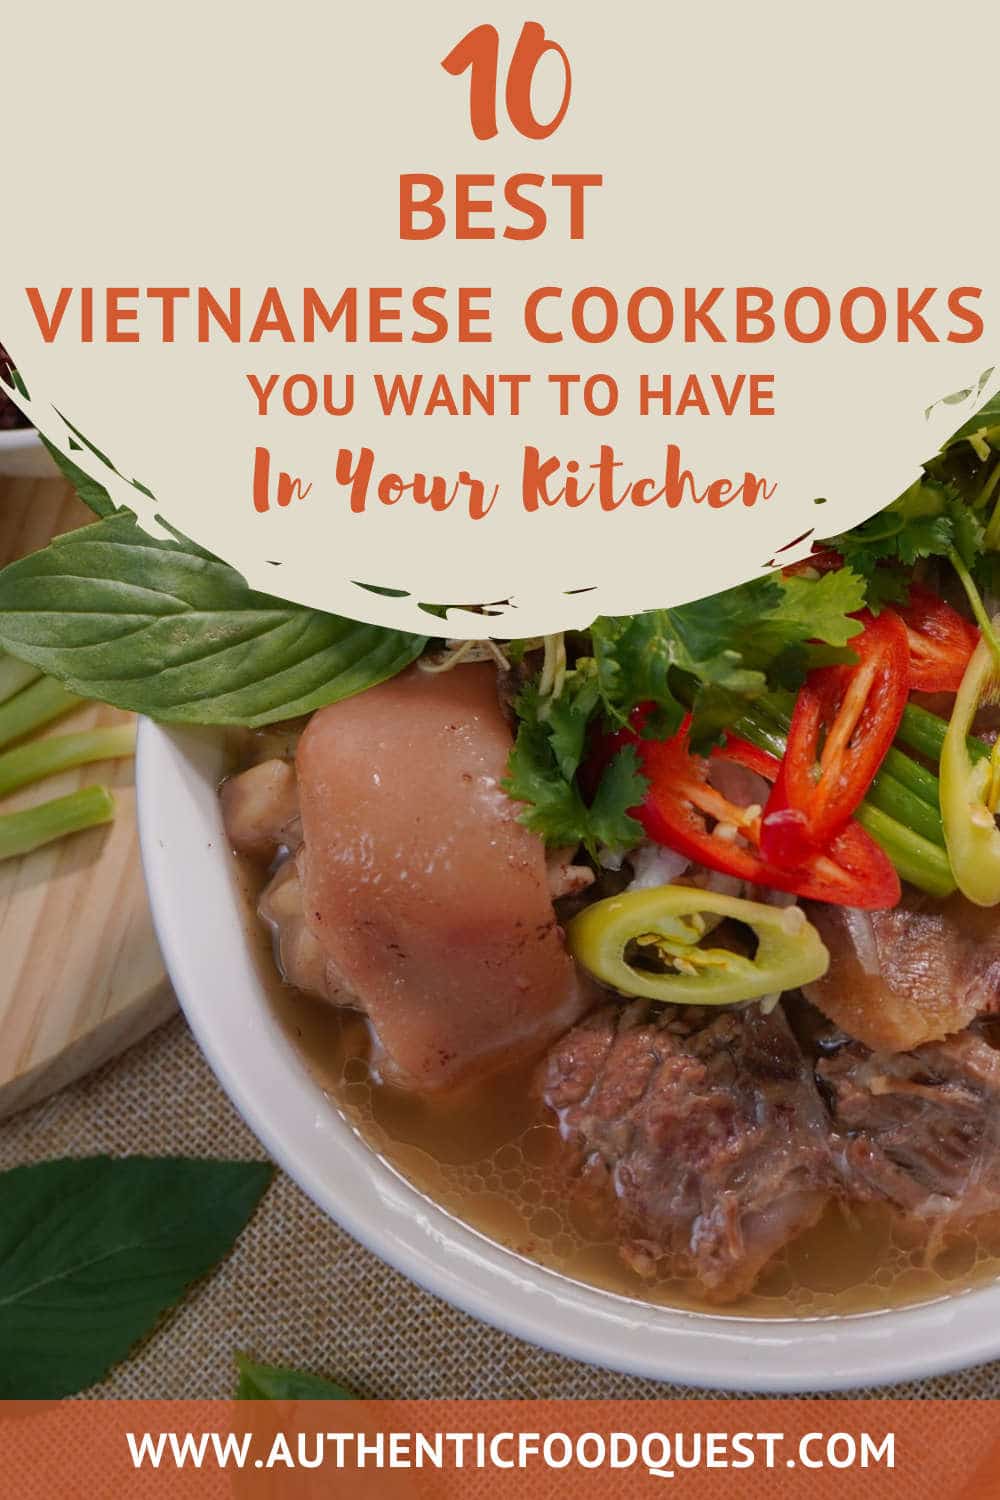 The 10 Best Vietnamese Cookbooks You Want To Have In Your Kitchen